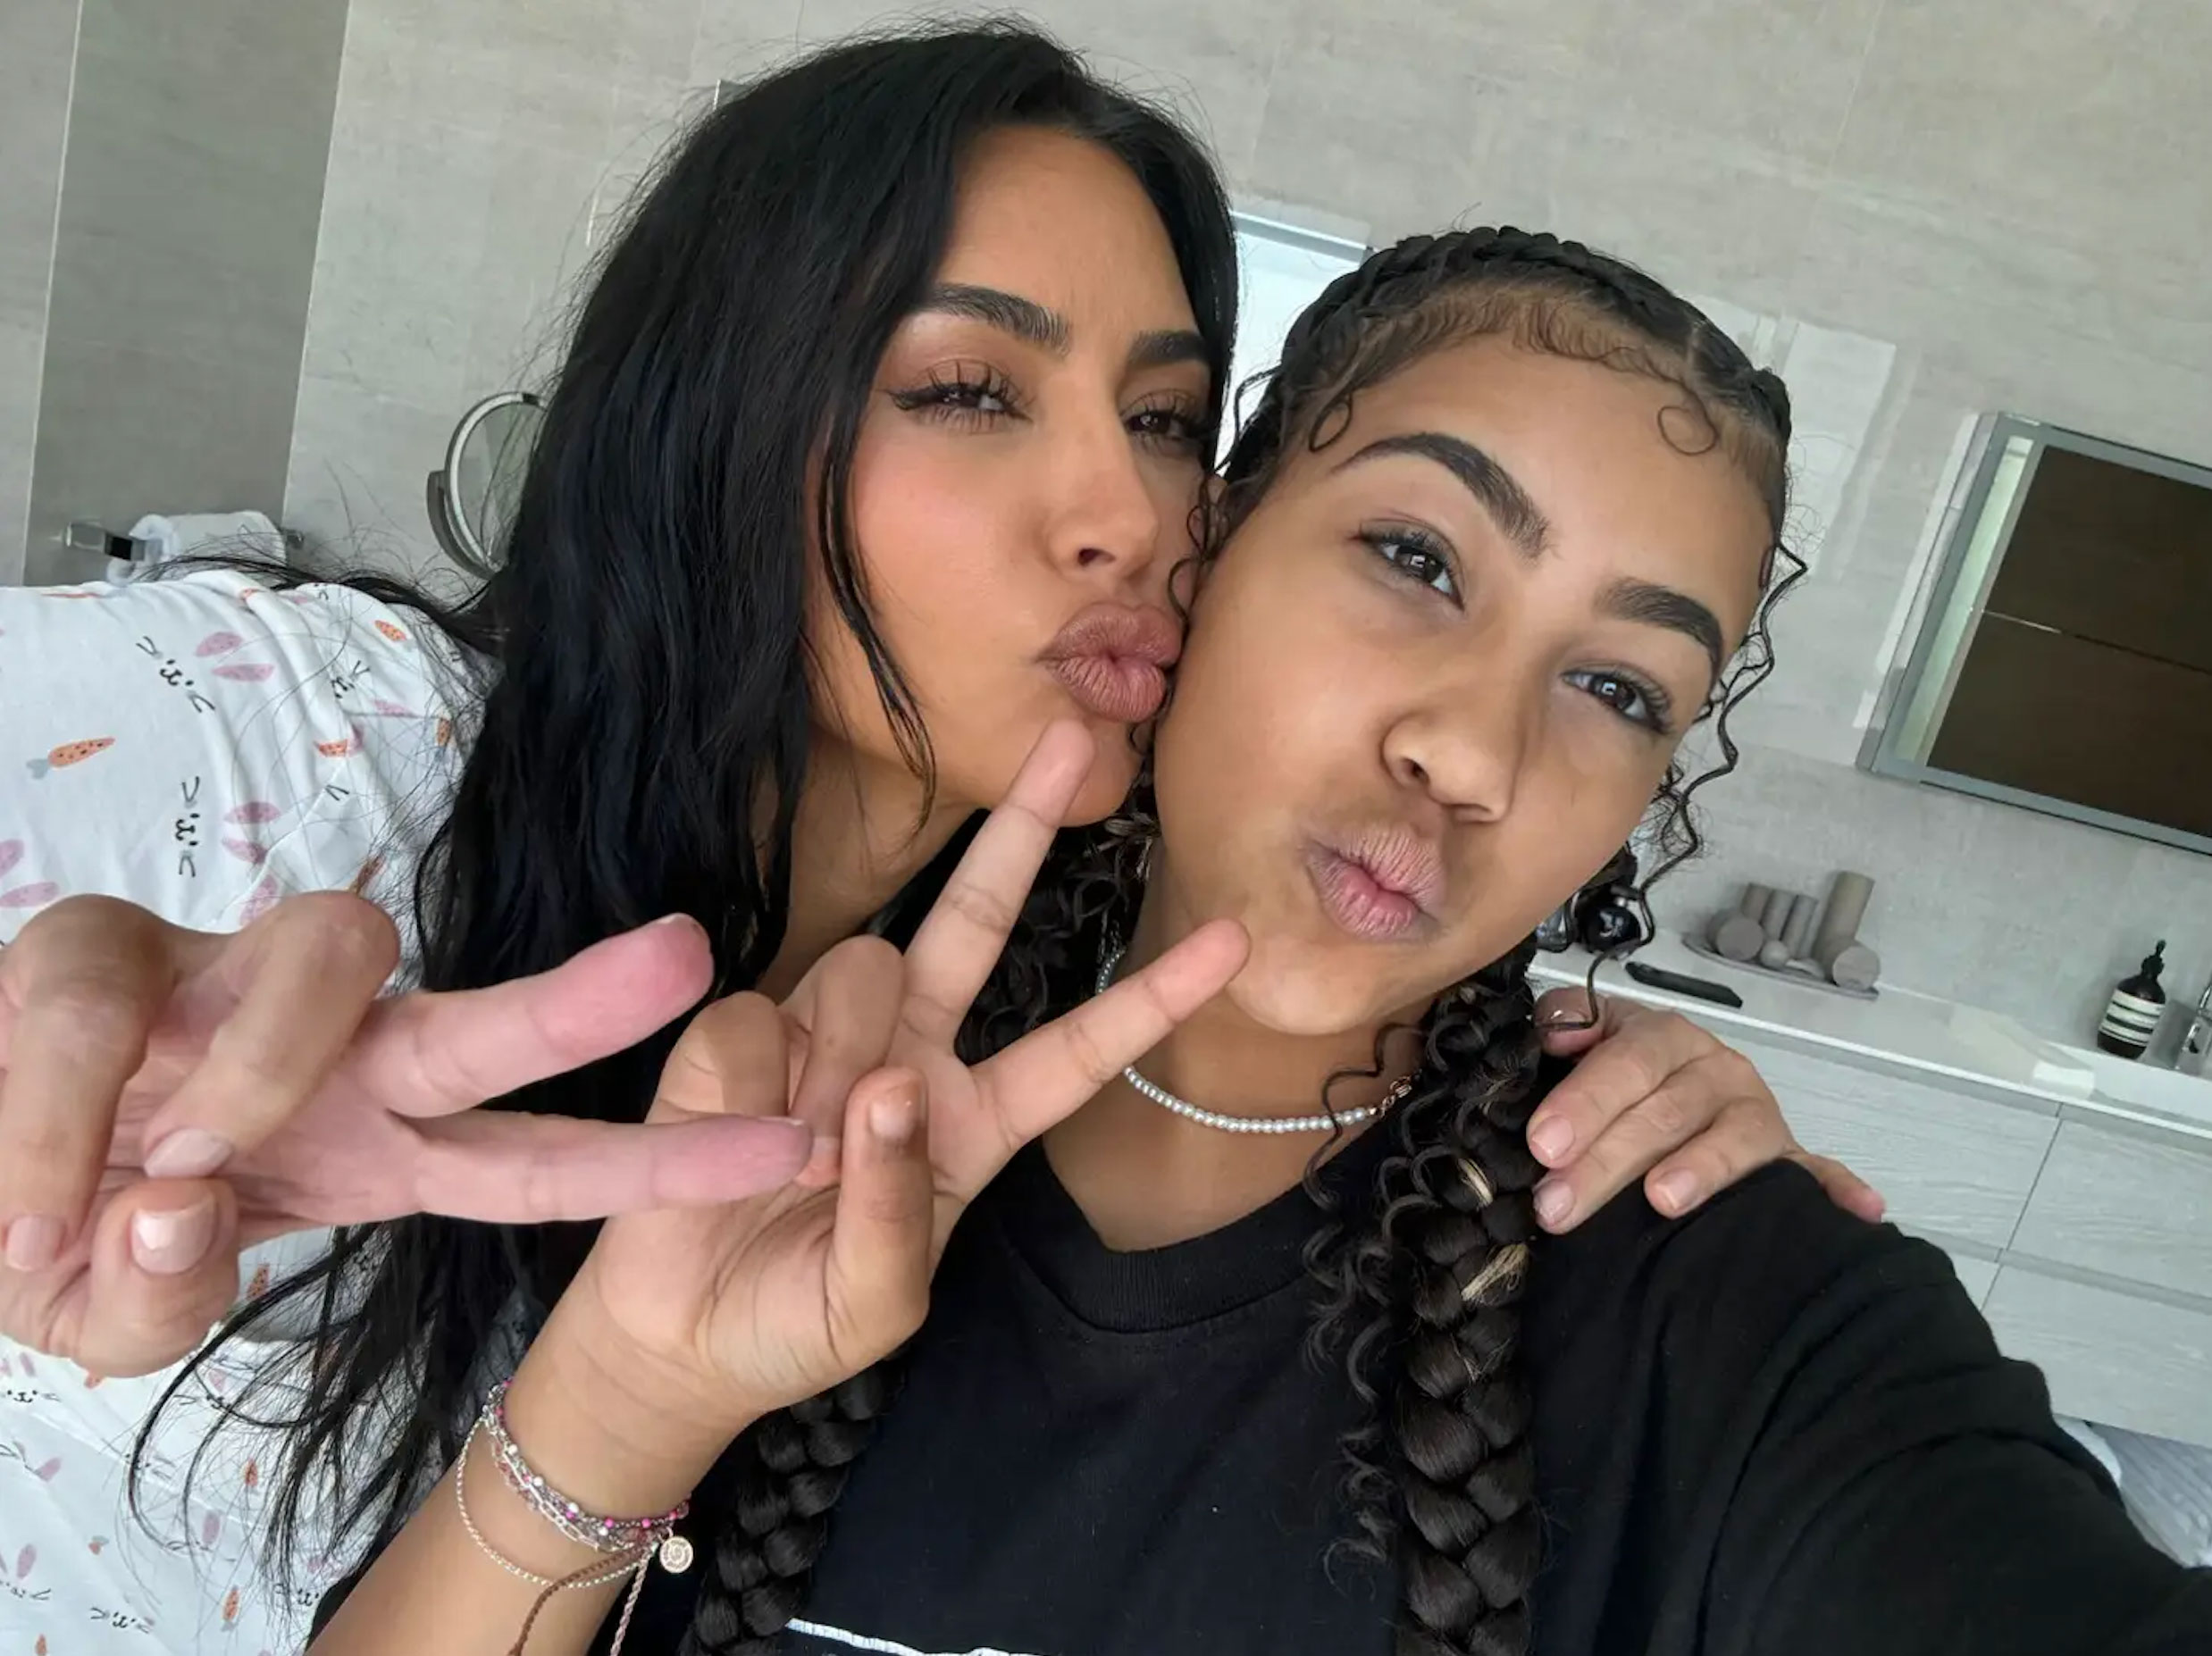 North West shared some new photos of her mom, Kim Kardashian